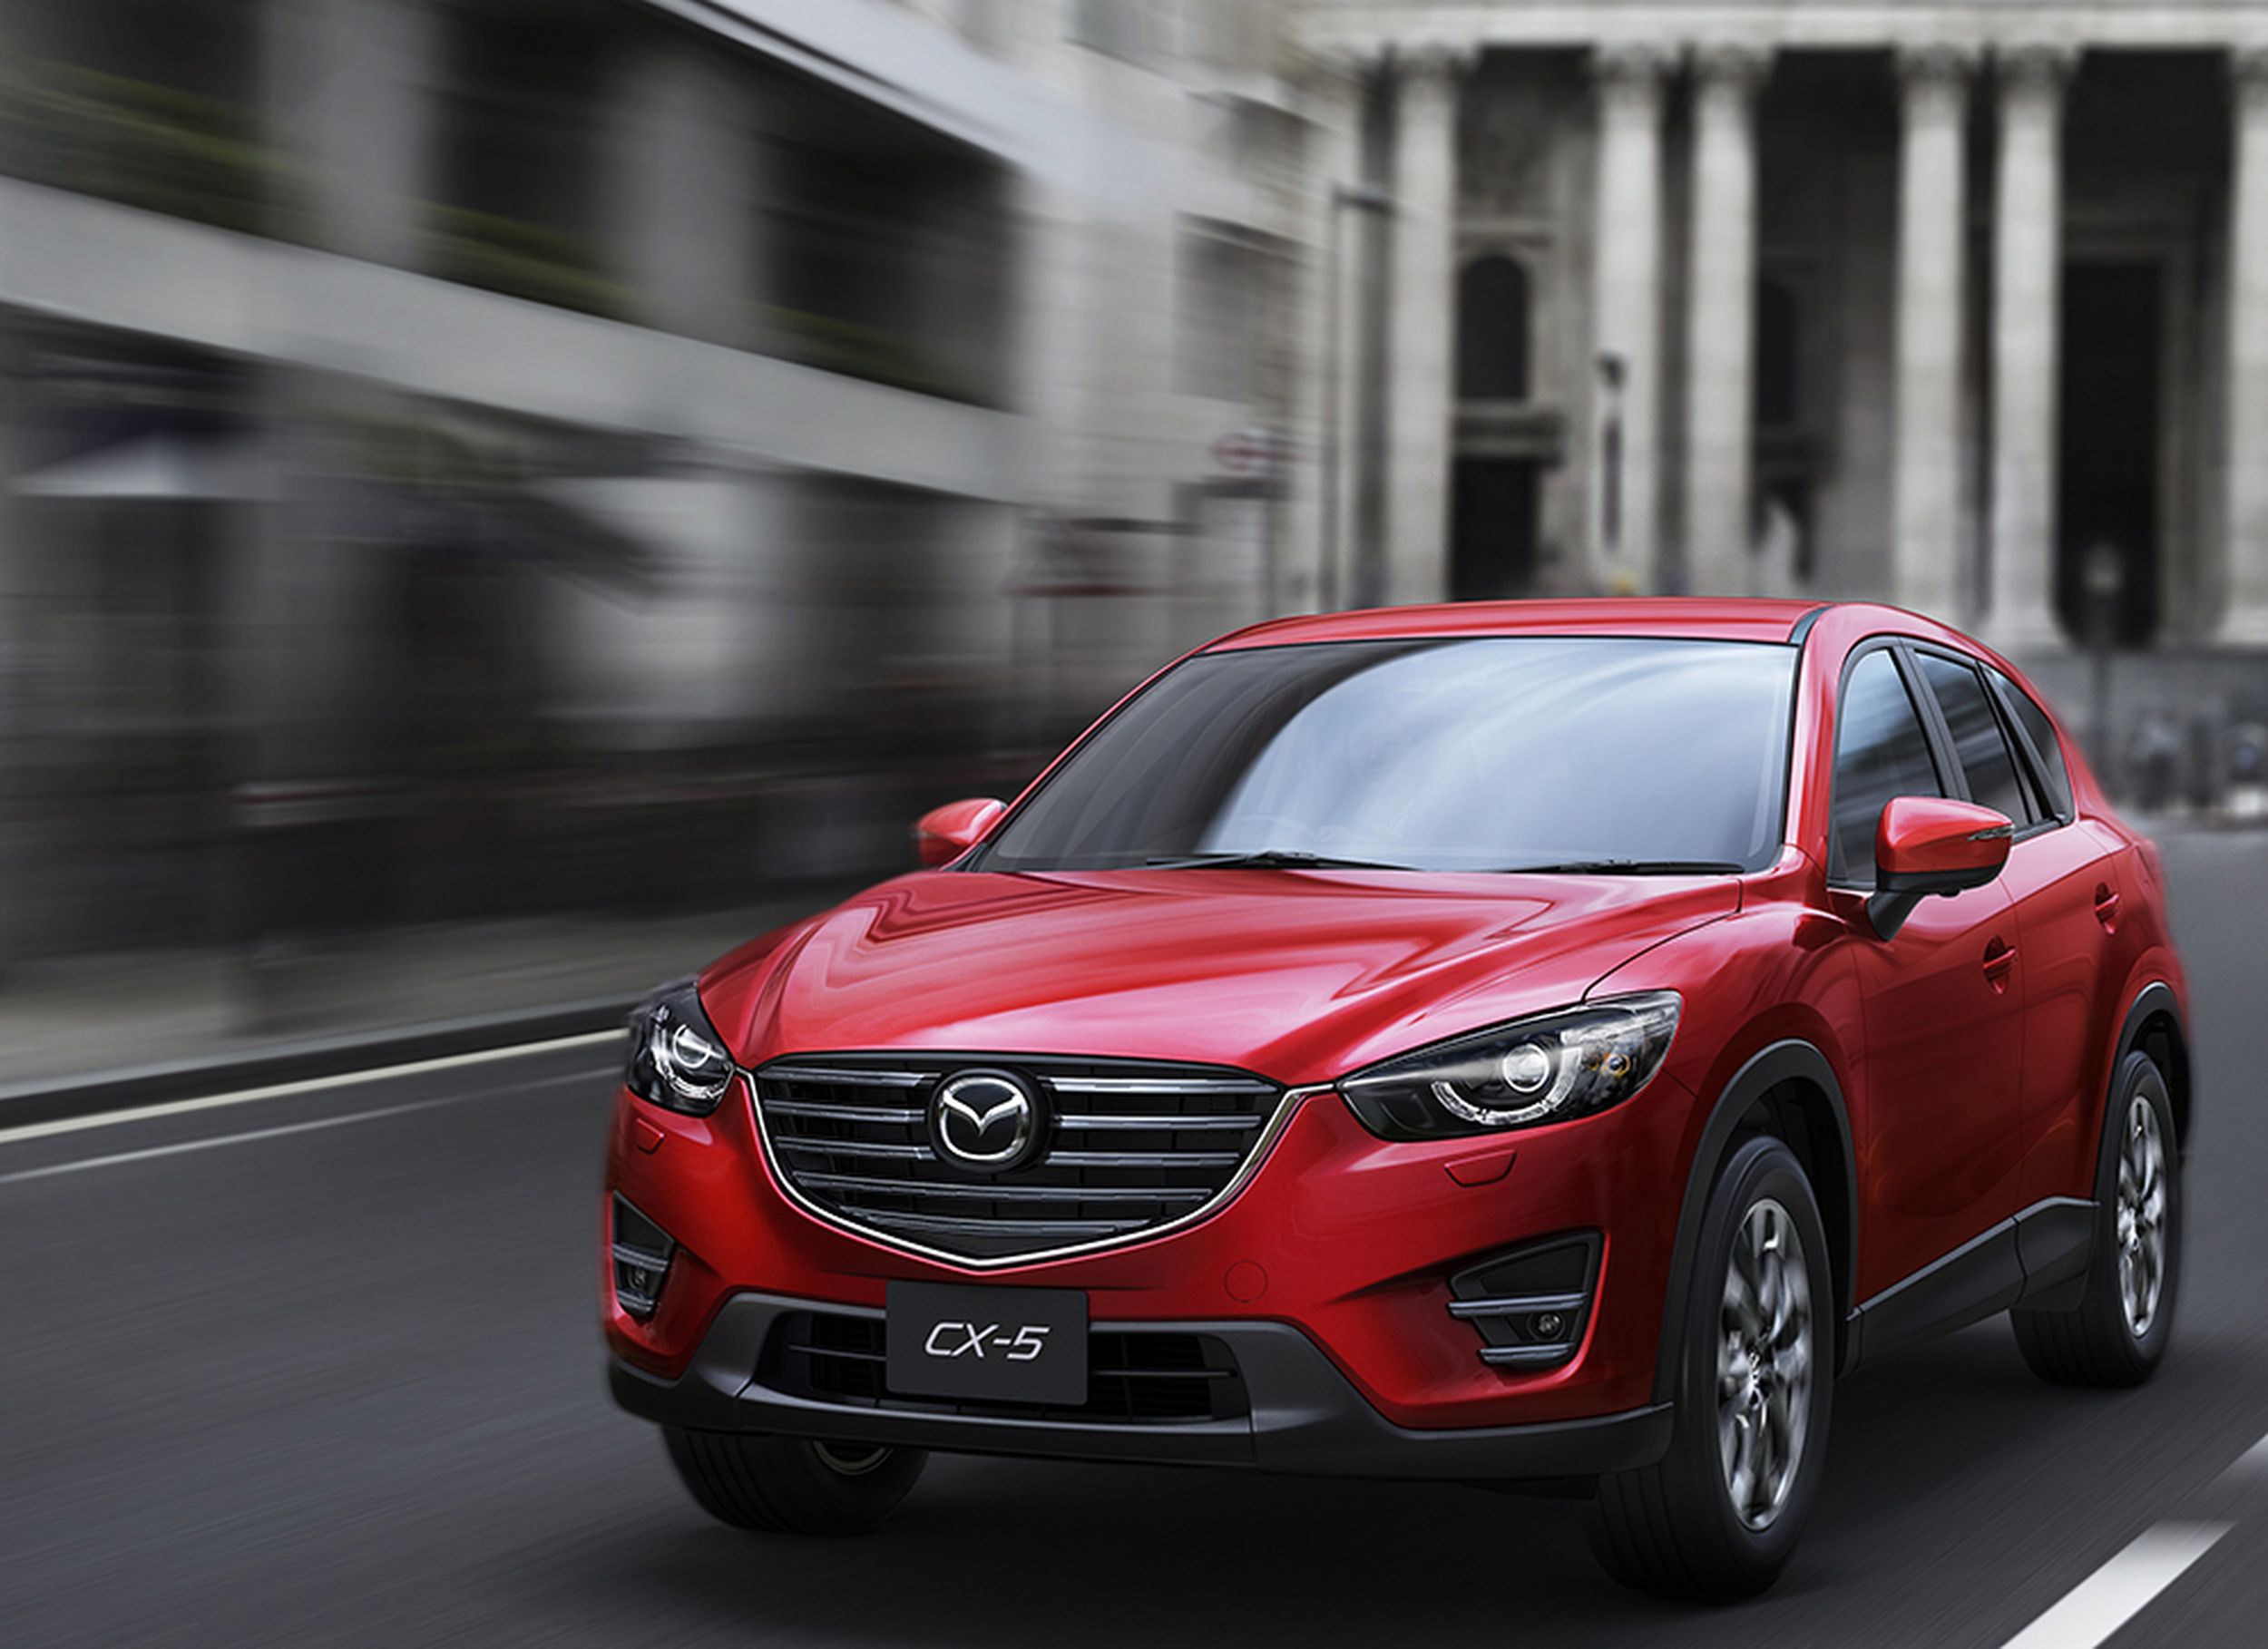 Don Adair Mazda Cx 5 Offers Driving Fun And Plenty More The Spokesman Review